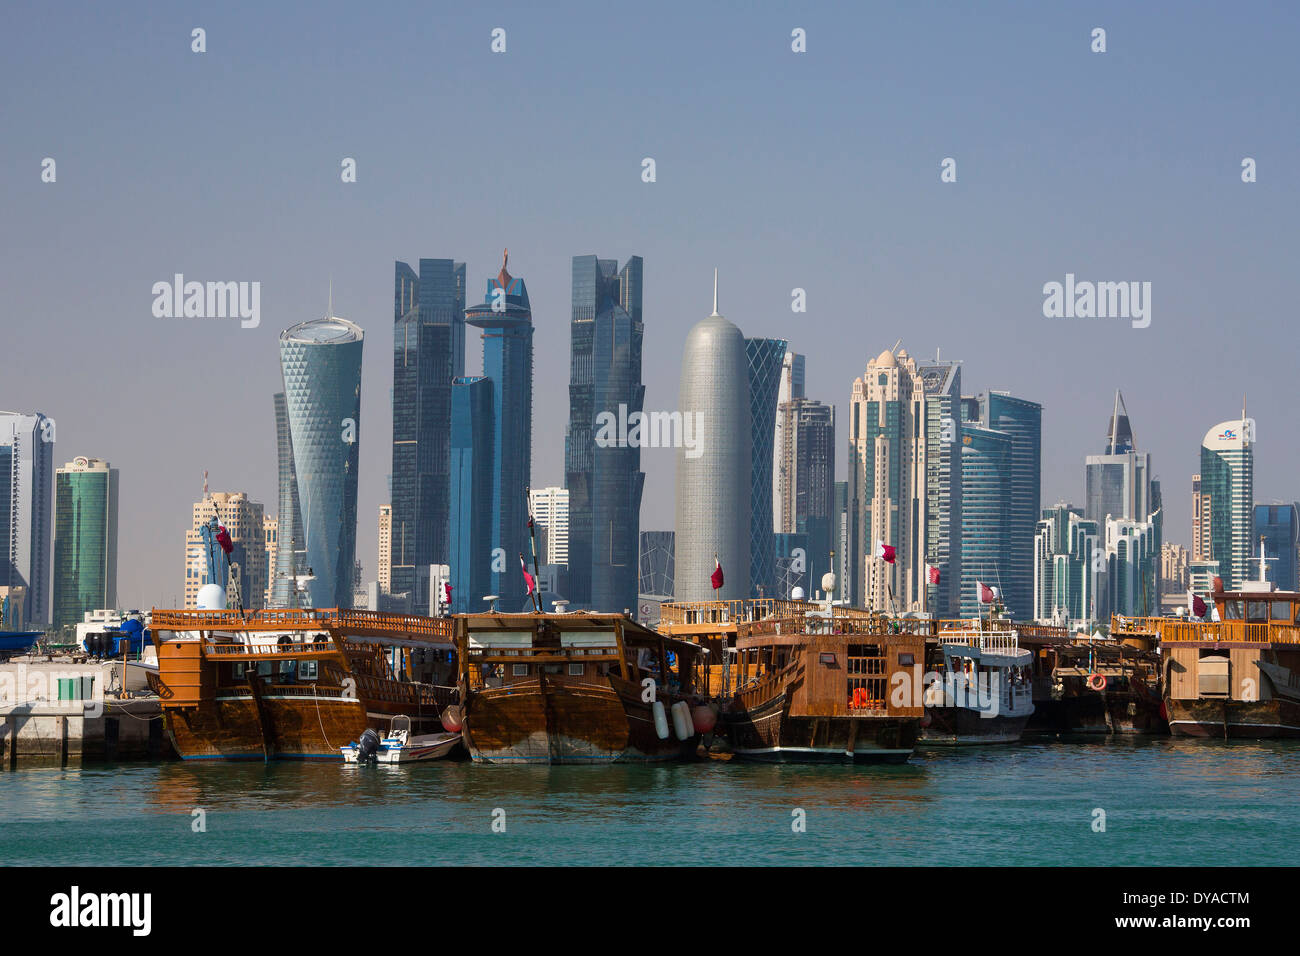 Doha Qatar Middle East architecture bay boats buildings city colourful futuristic harbour marina skyline skyscrapers tourist Stock Photo